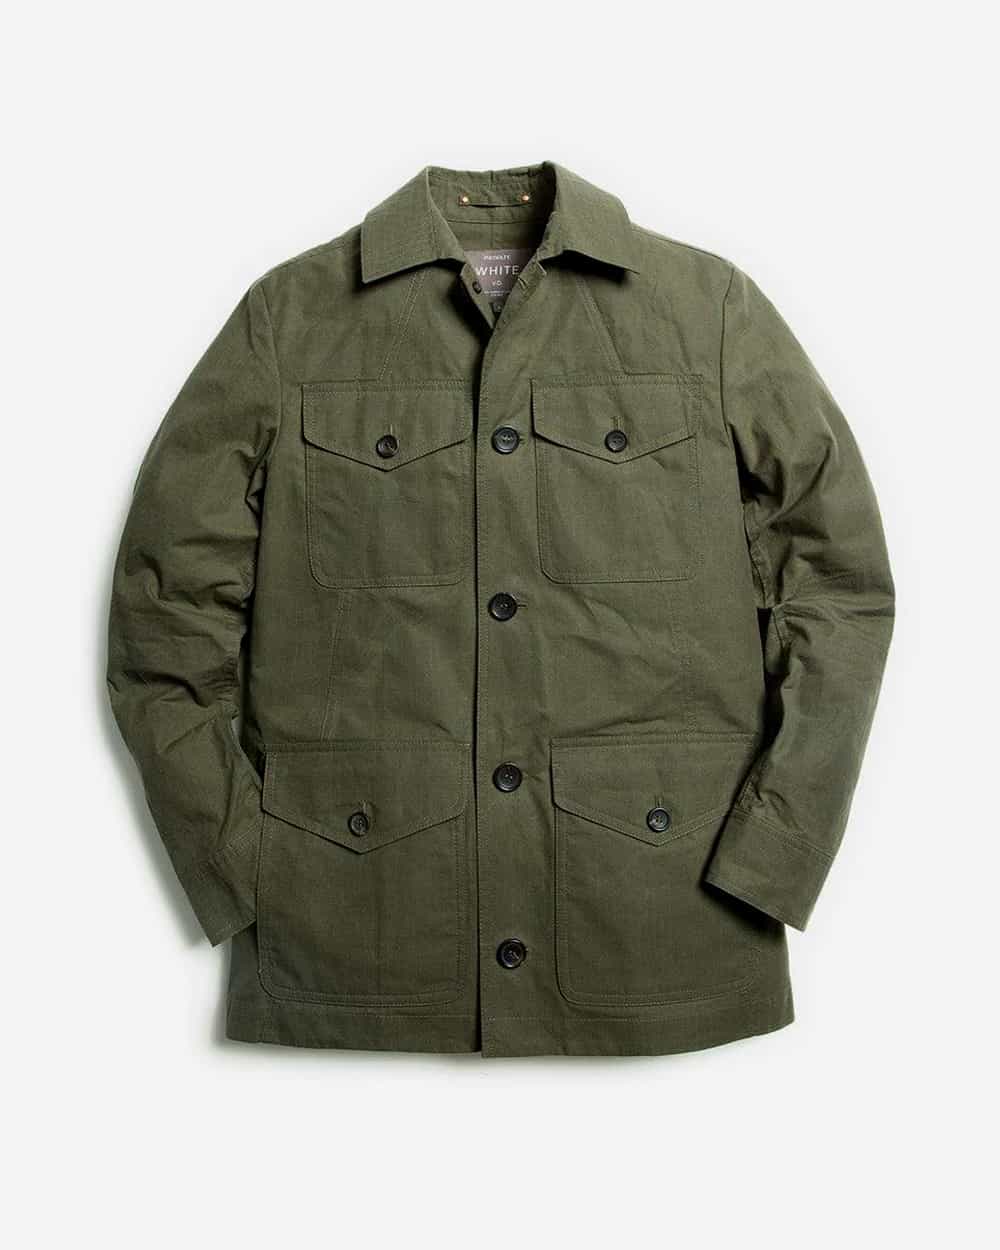 The Best M65 Field Jacket Guide You'll Ever Read (2023)